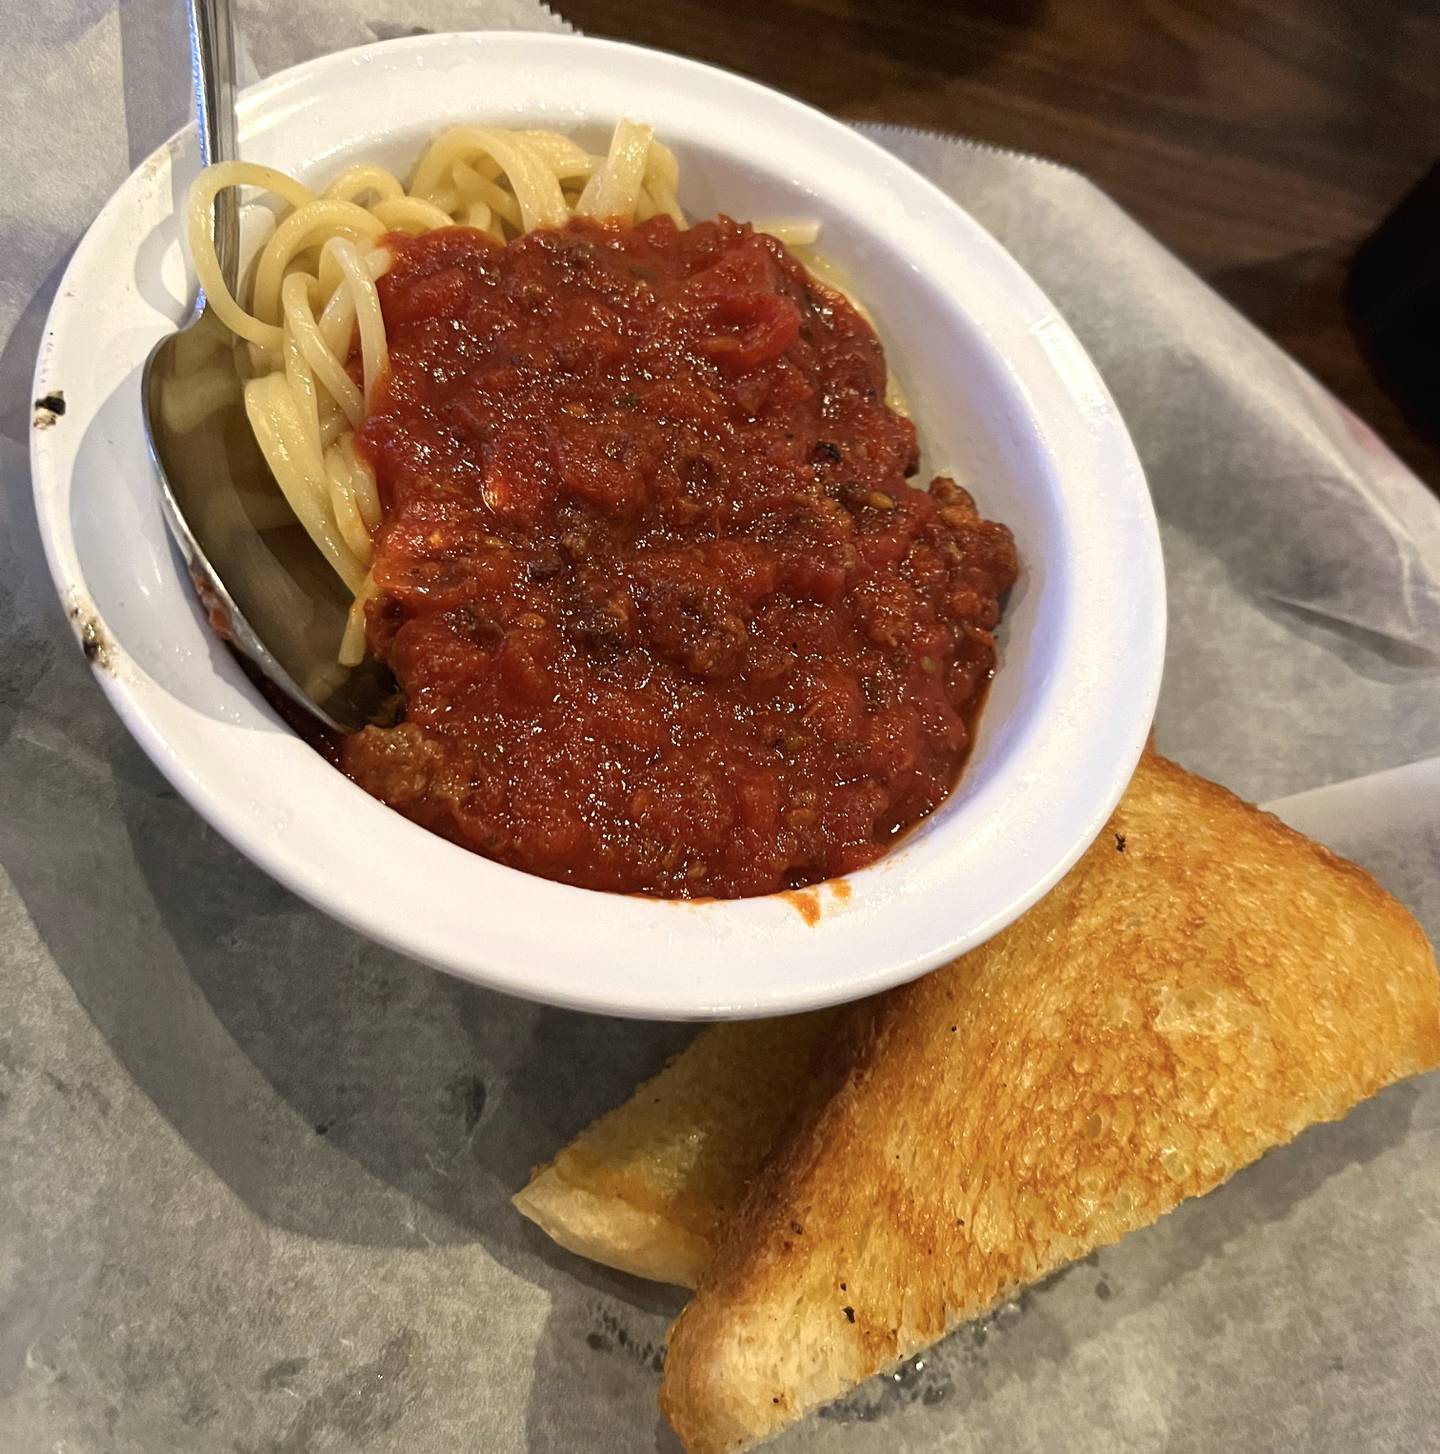 The spaghetti and garlic bread was one of many options on the kids menu.